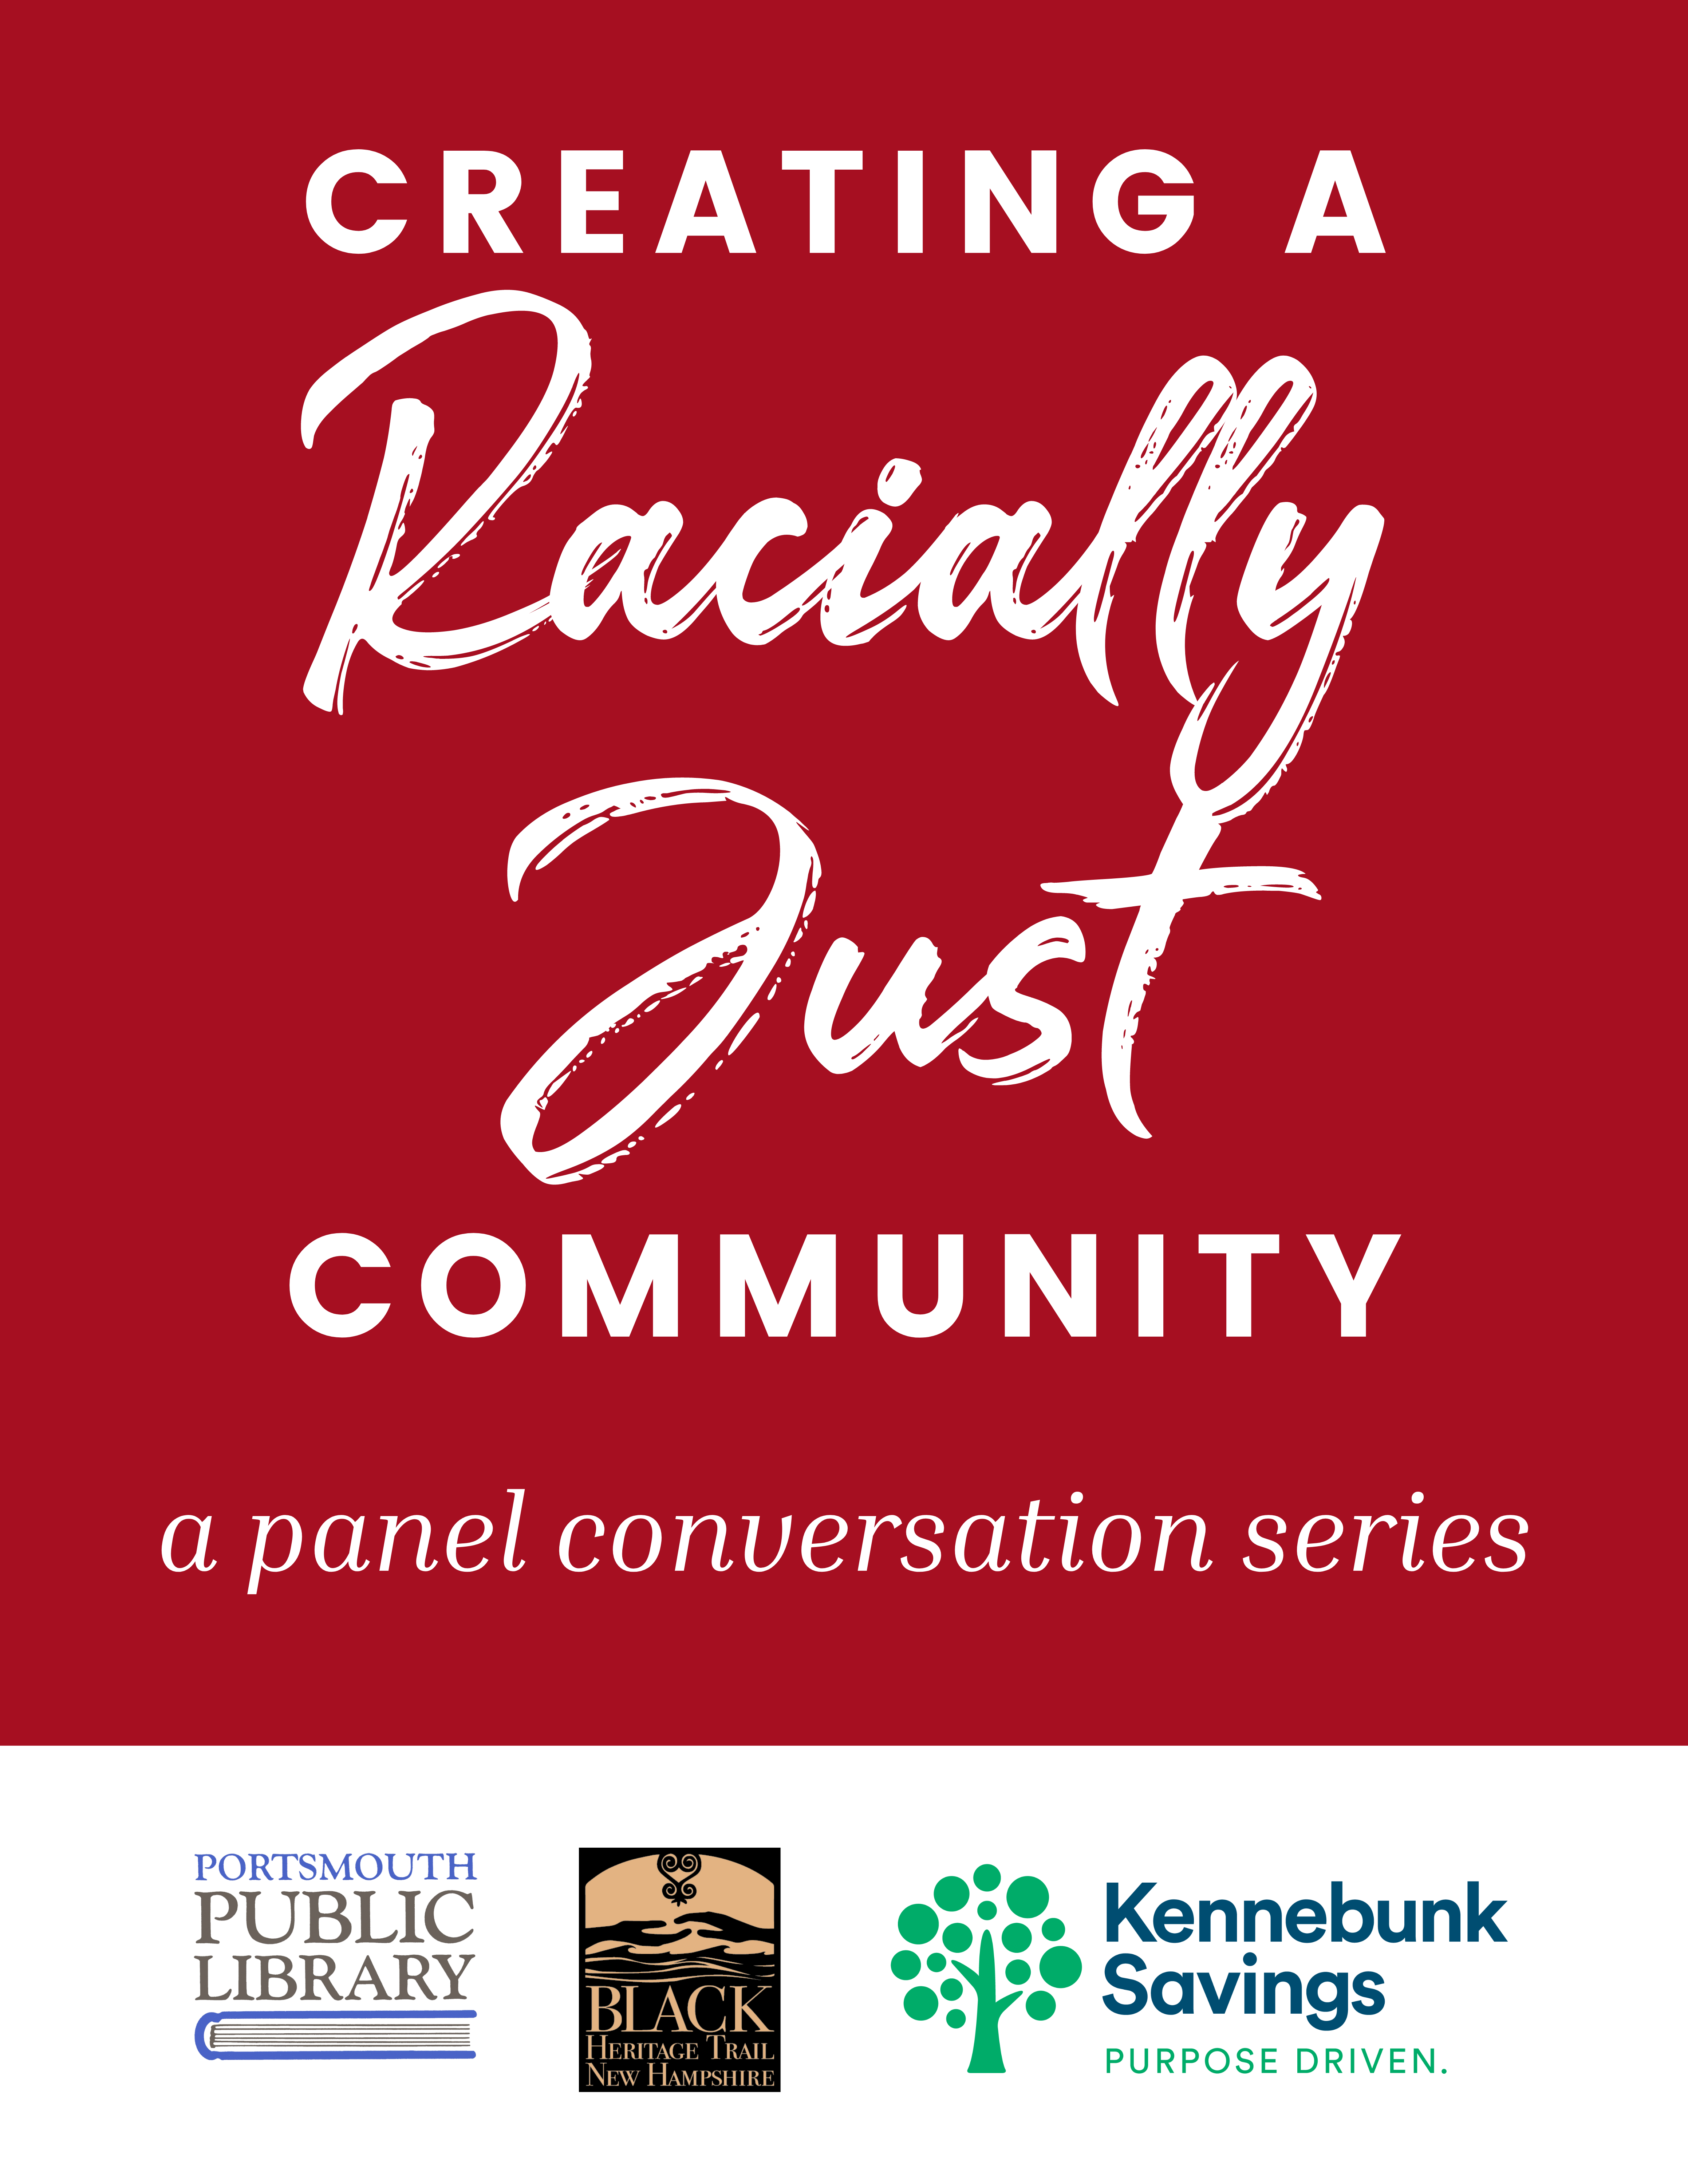 Creating a Racially Just Community